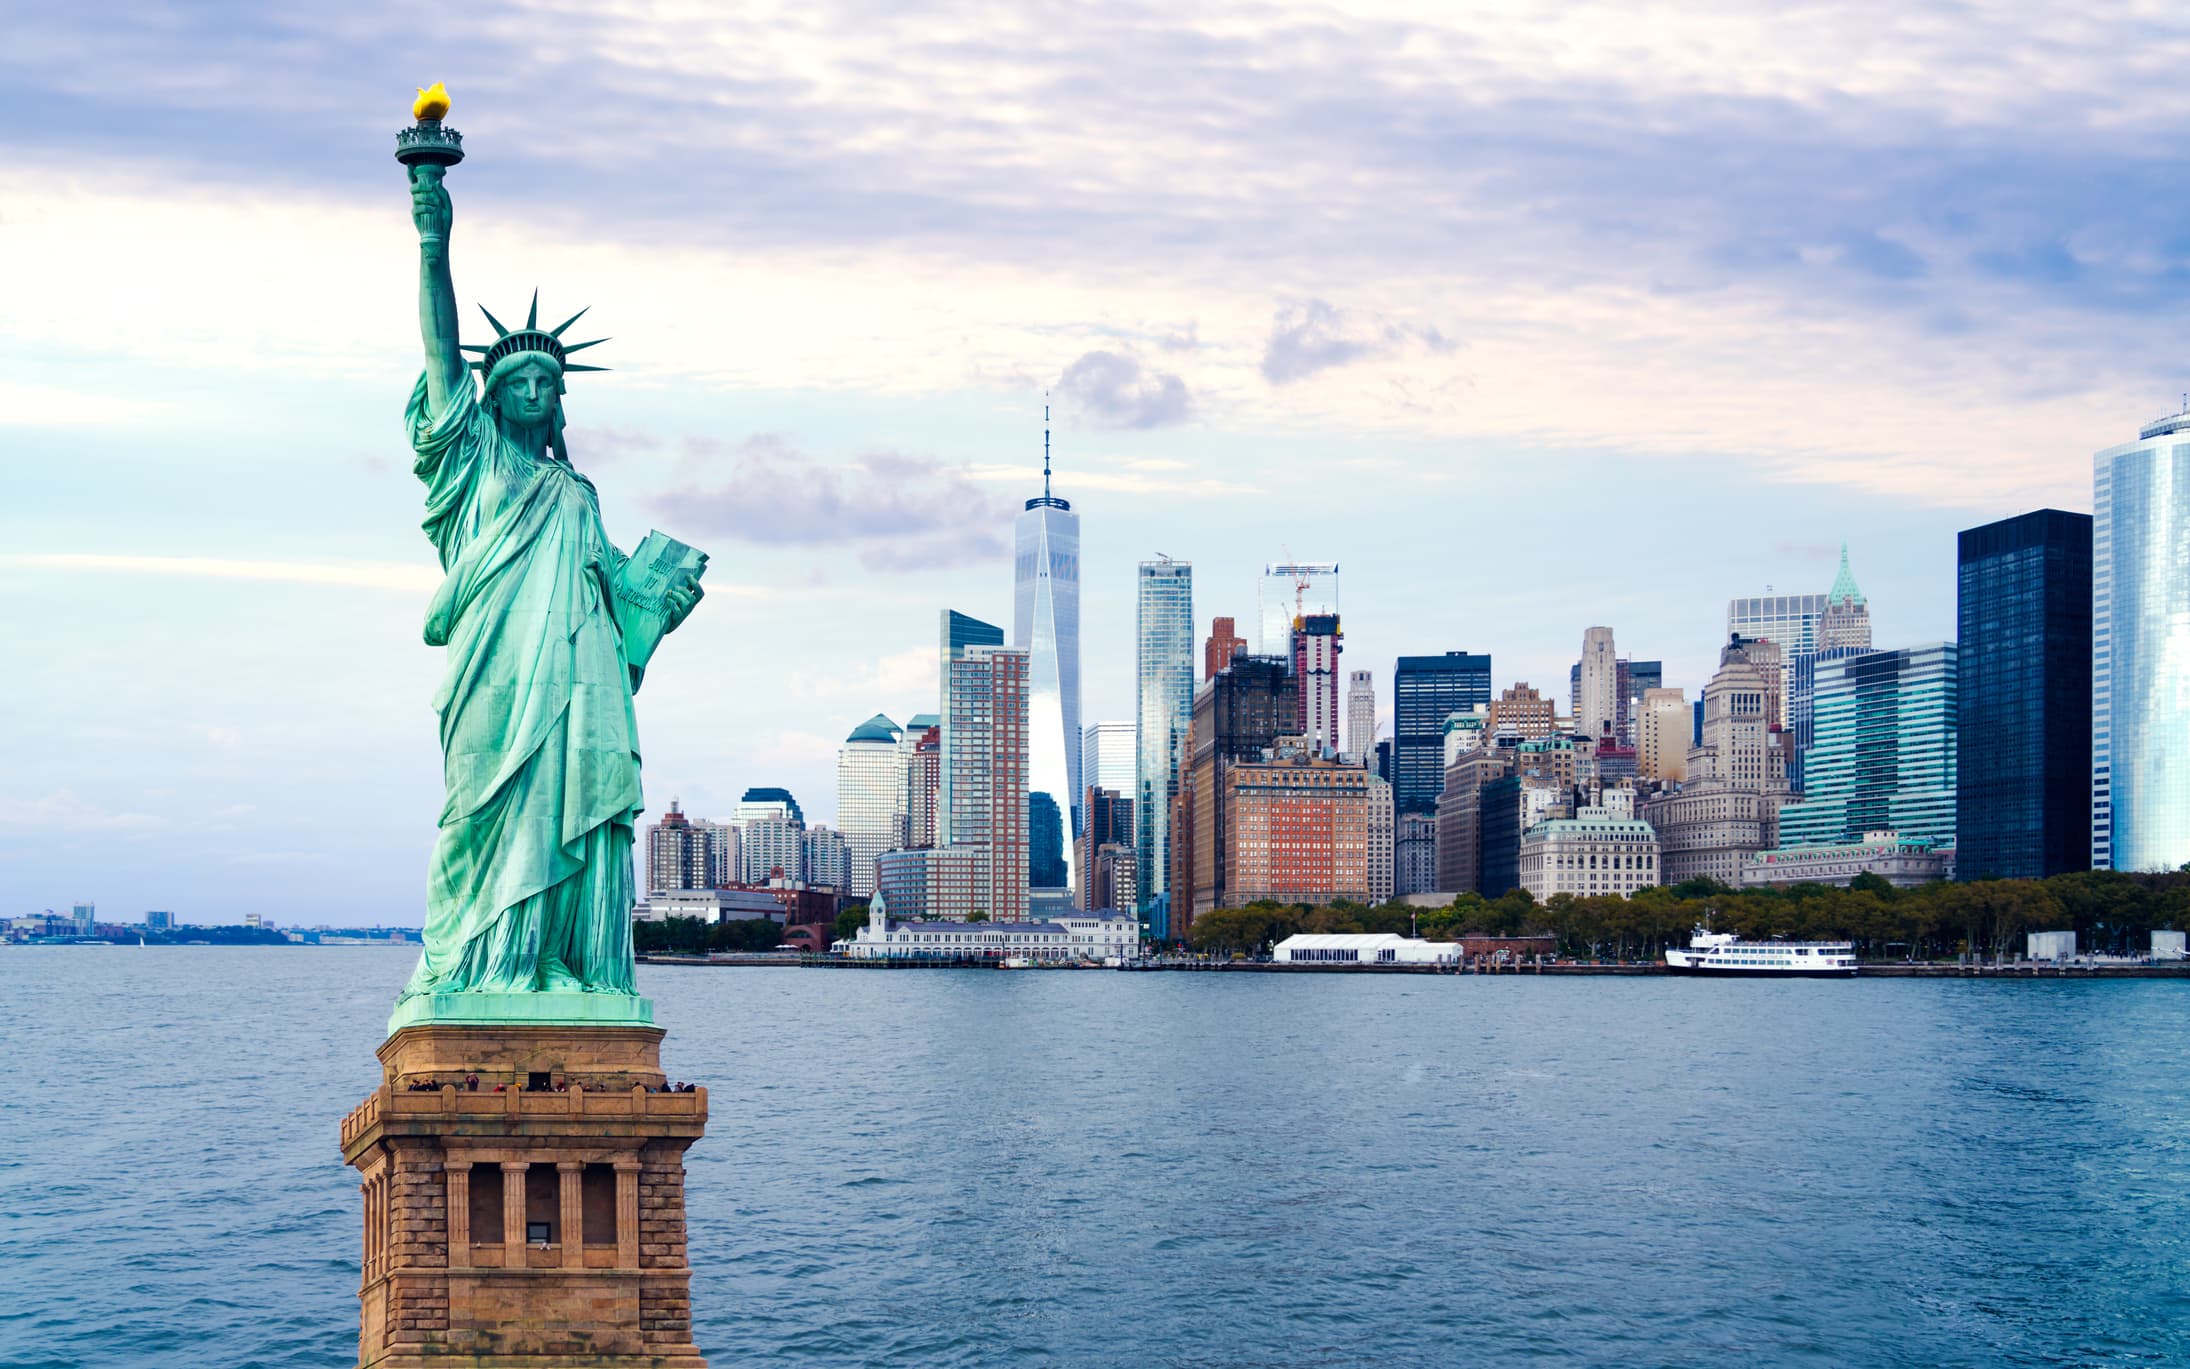 New York City ranks 48th out of 57 cities for expats to live and